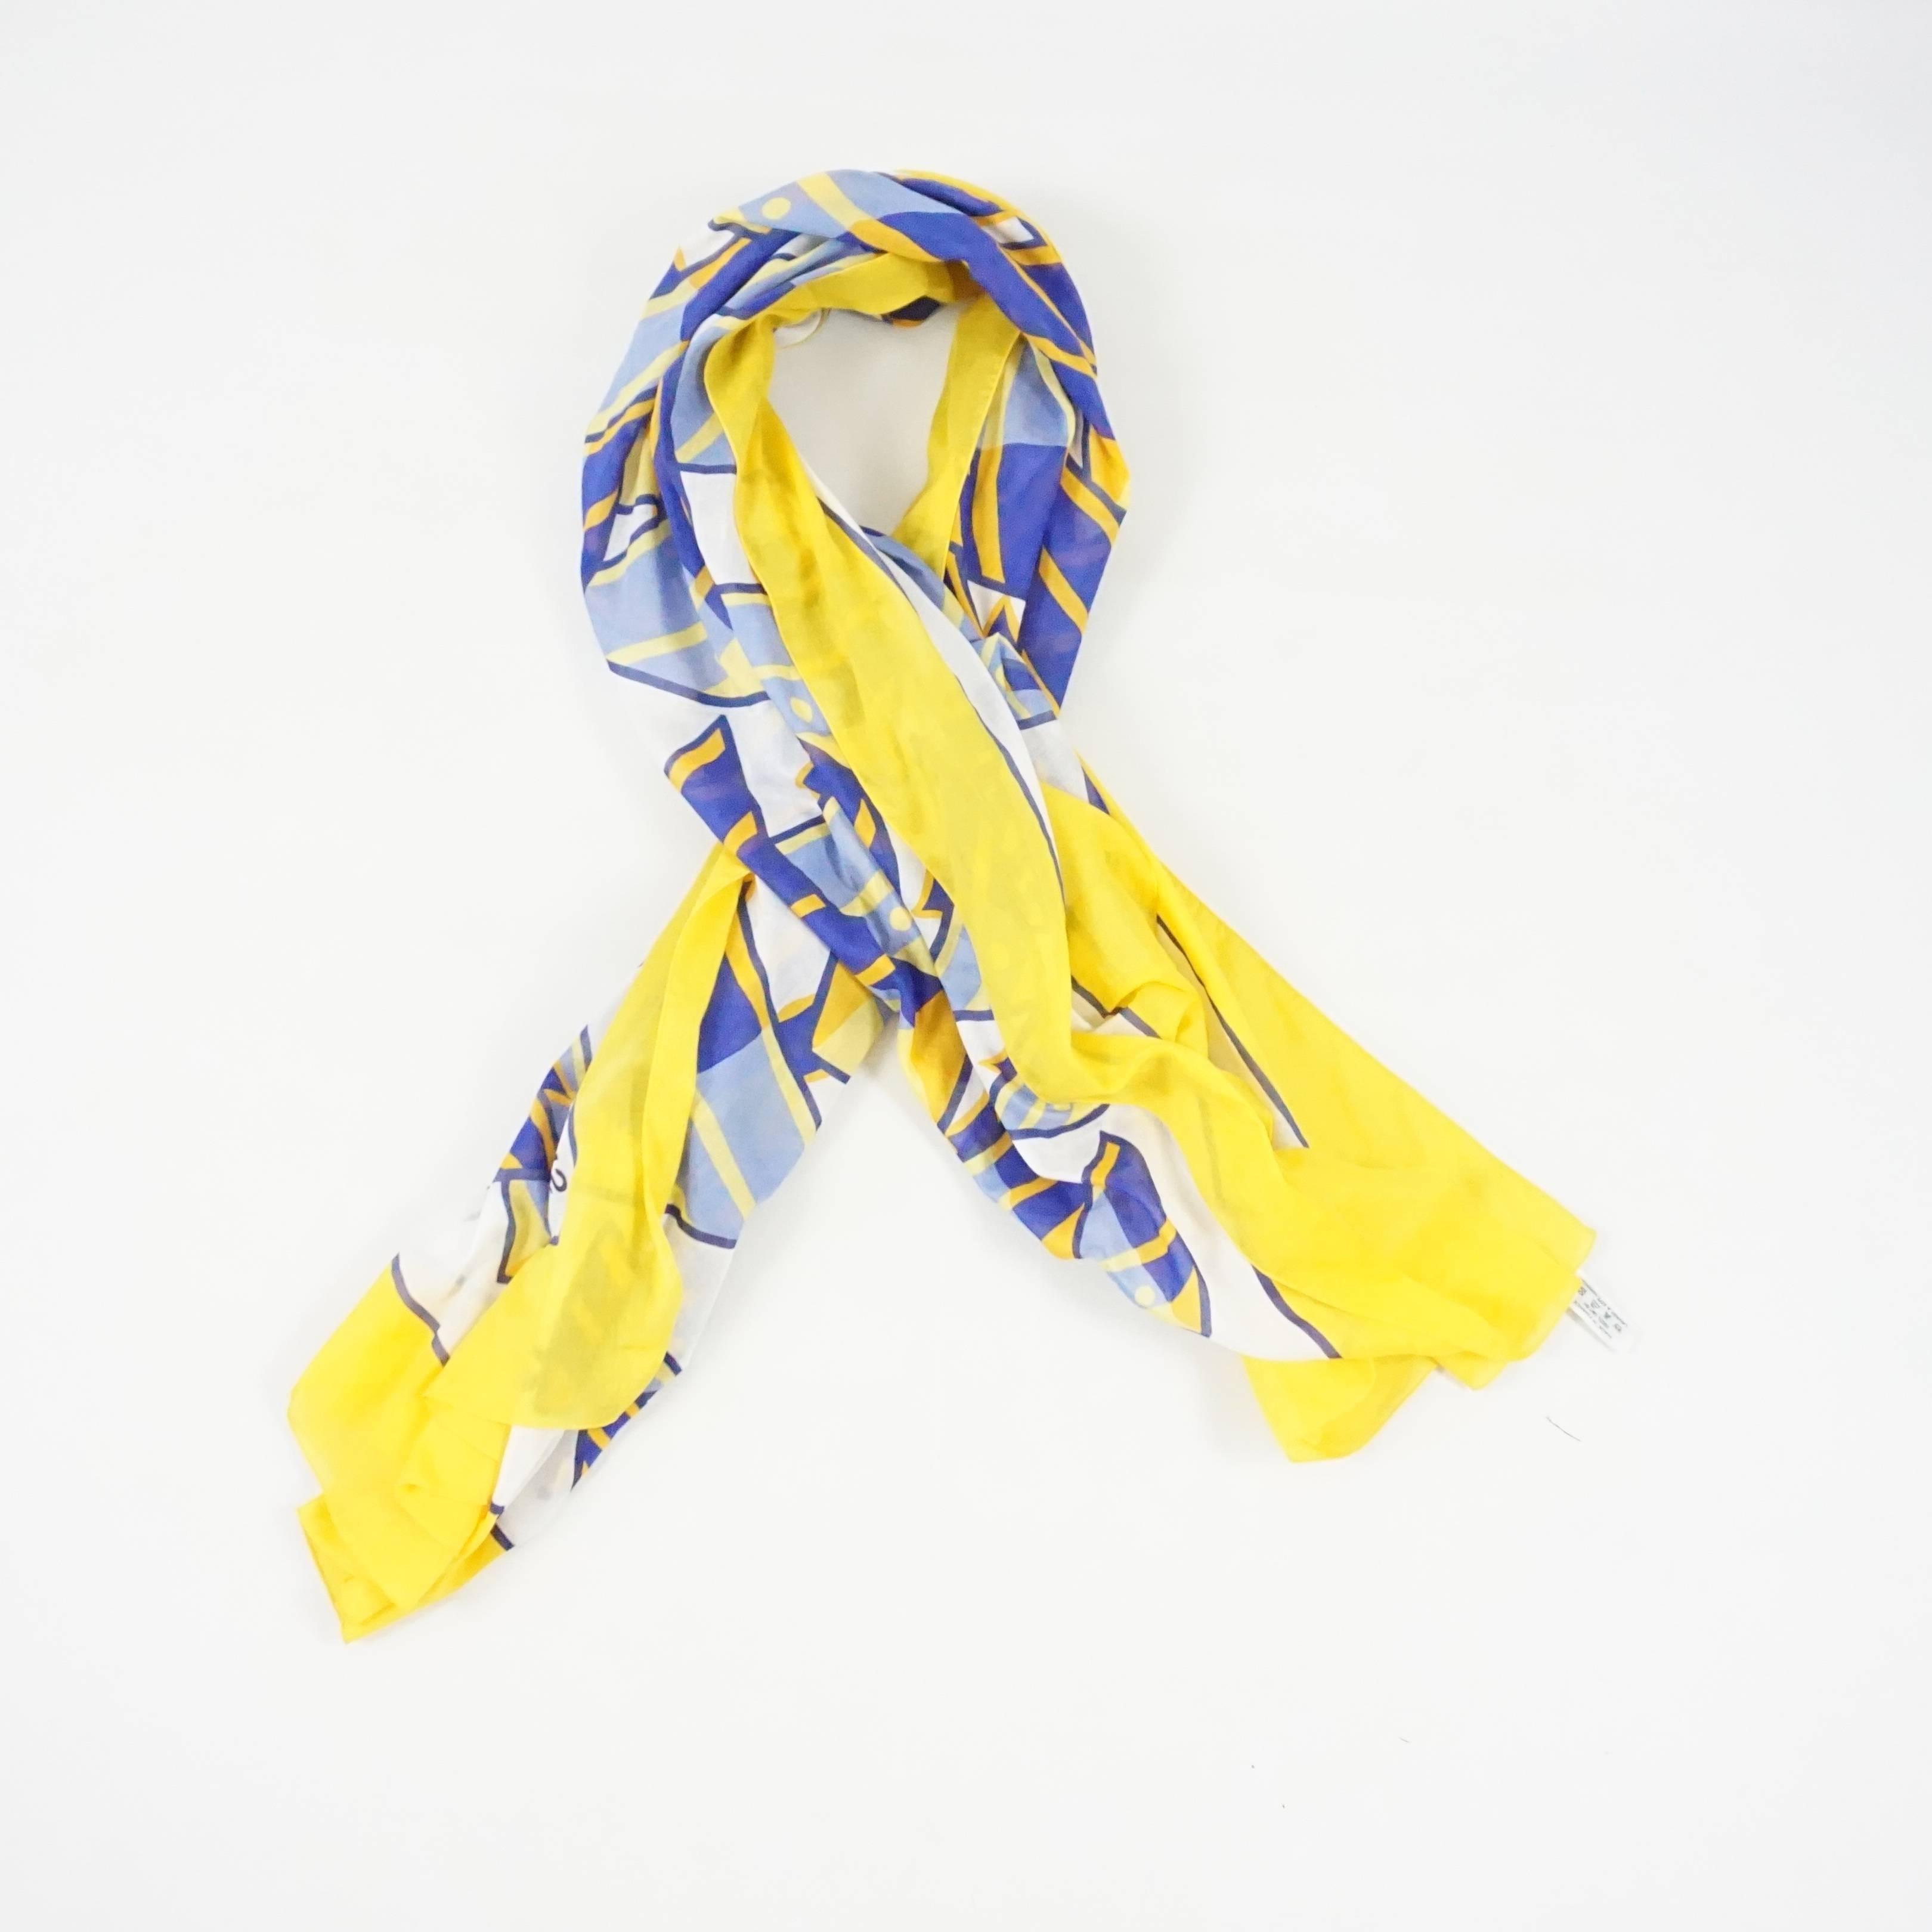 This fun Hermes shawl / pareo is blue, white, and yellow. It has a fish design. This piece can be worn as either a shawl or a pareo (see last images). It is in excellent condition.

Measurements
Height: 58.5"
Length: 68.5"